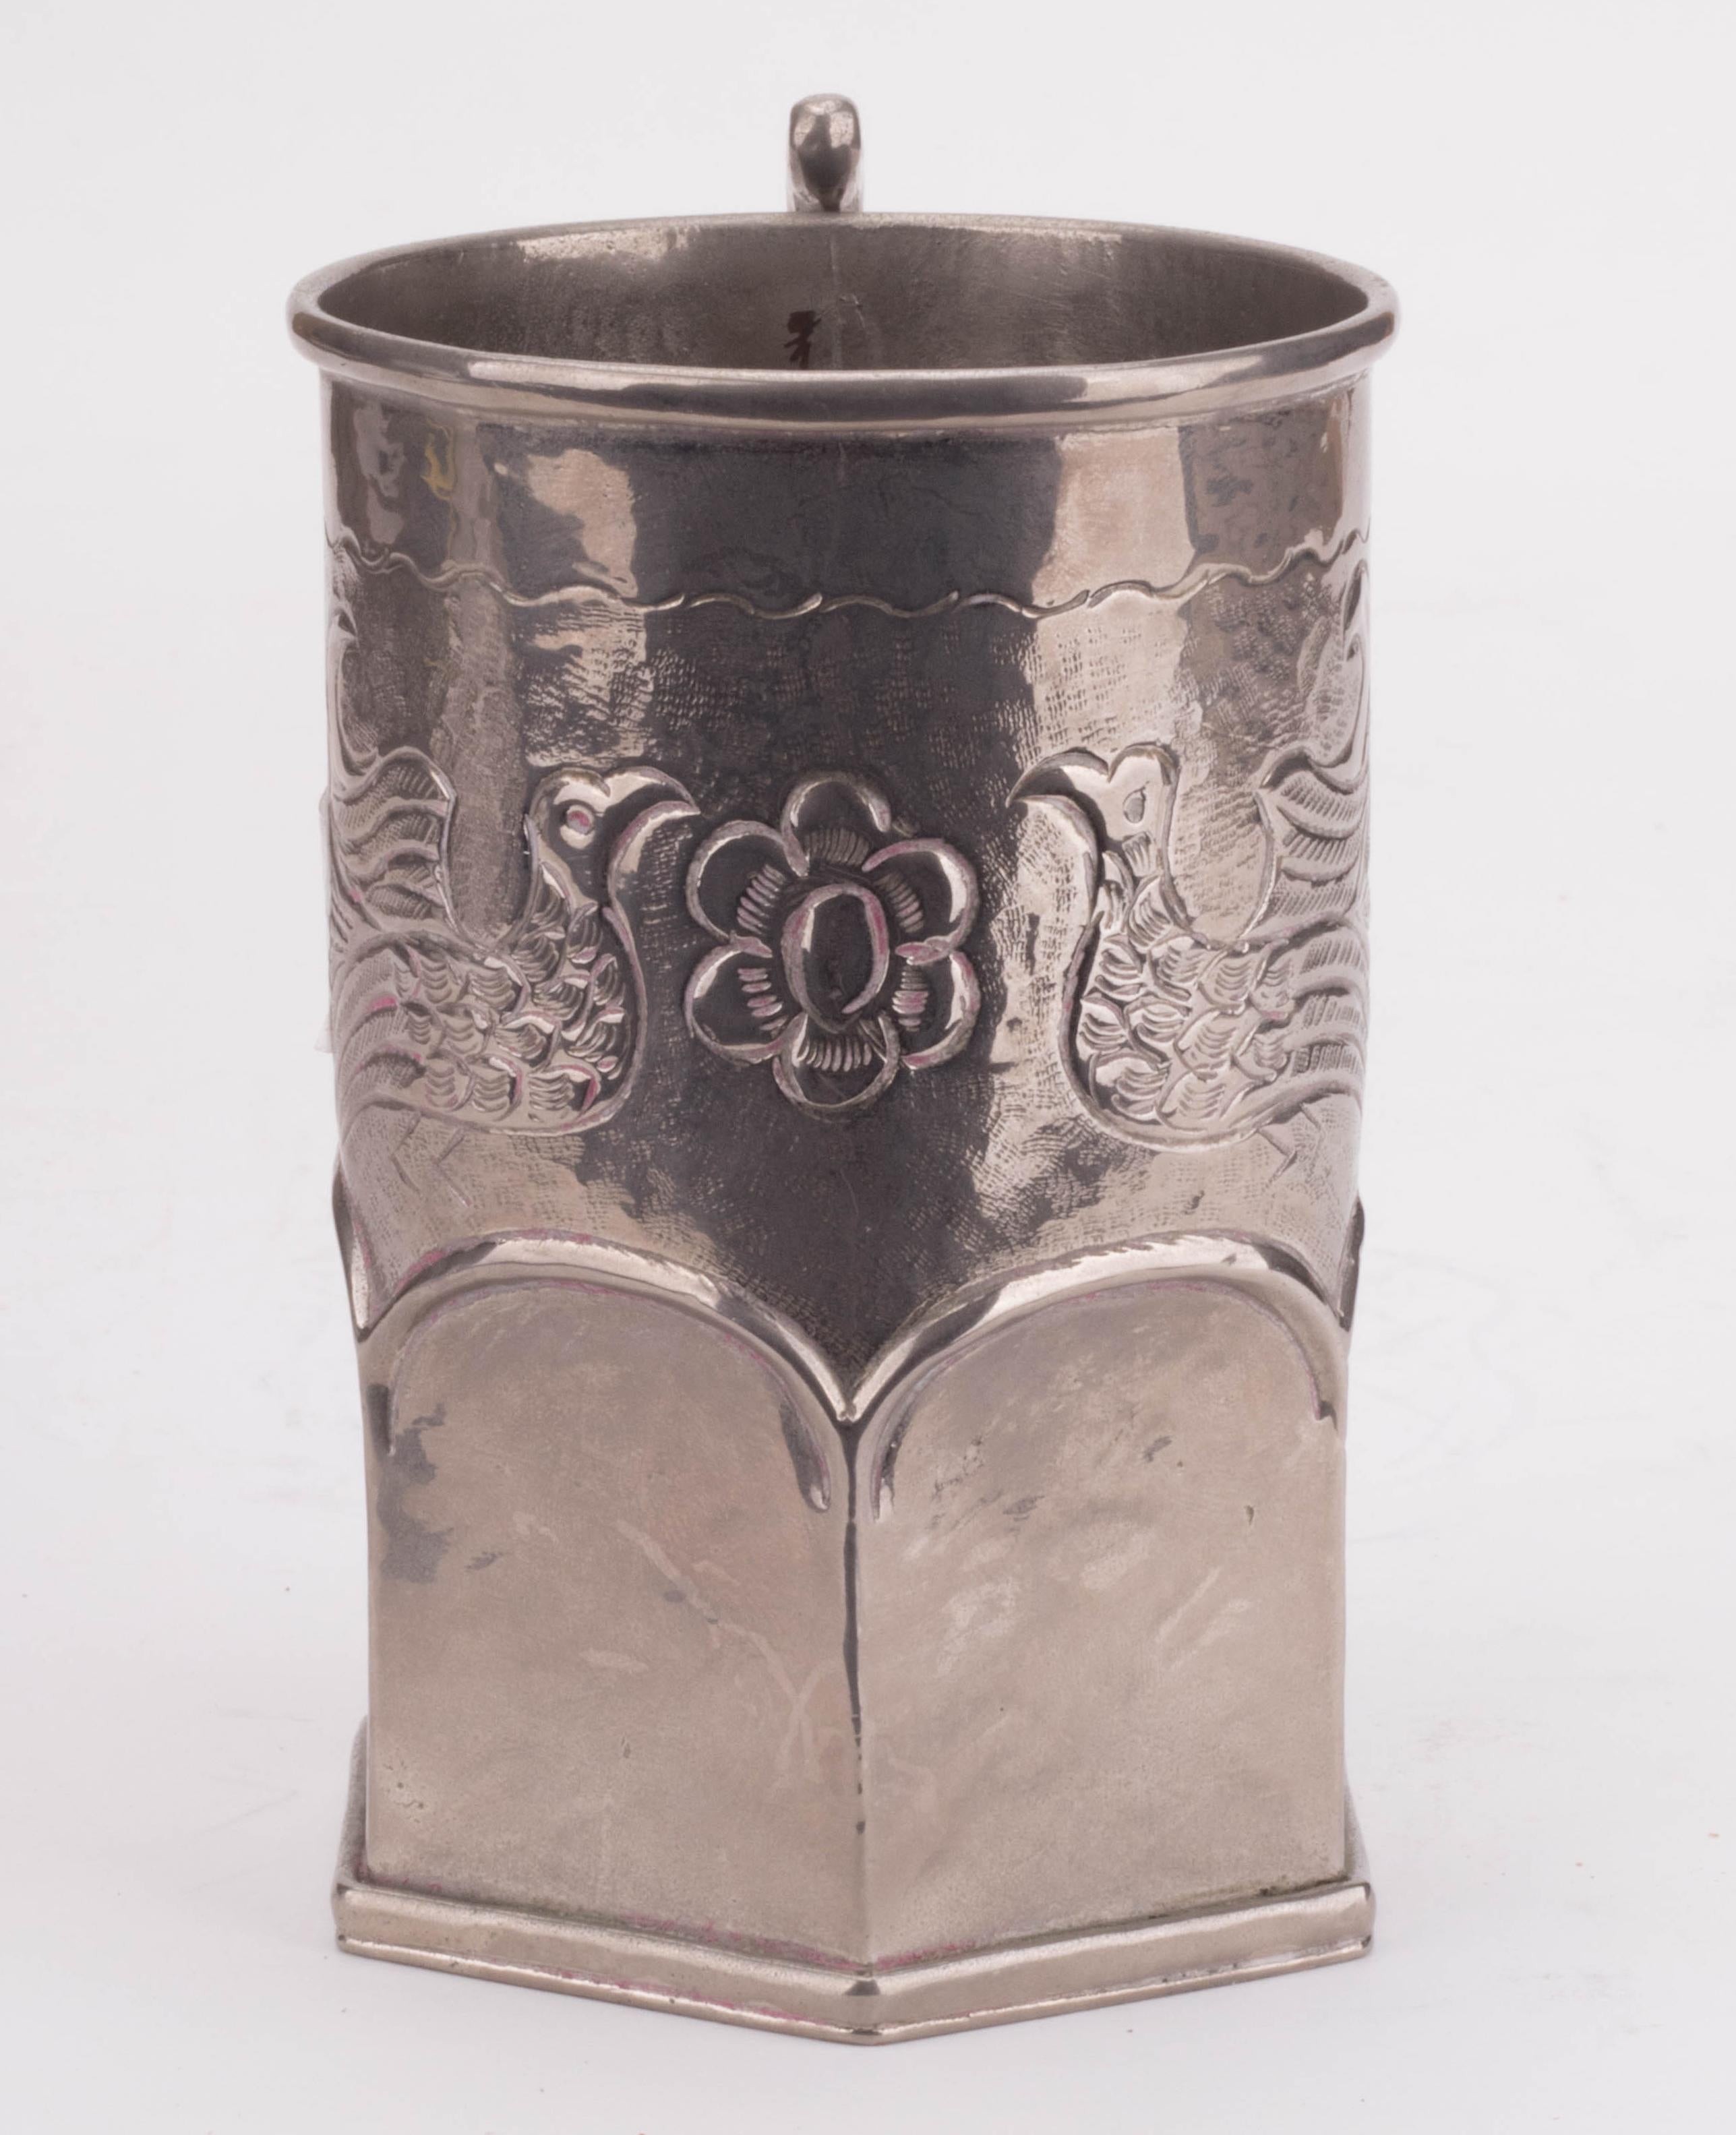 Peruvian 19th Century Silvered Metal Jug with Floral Engravings